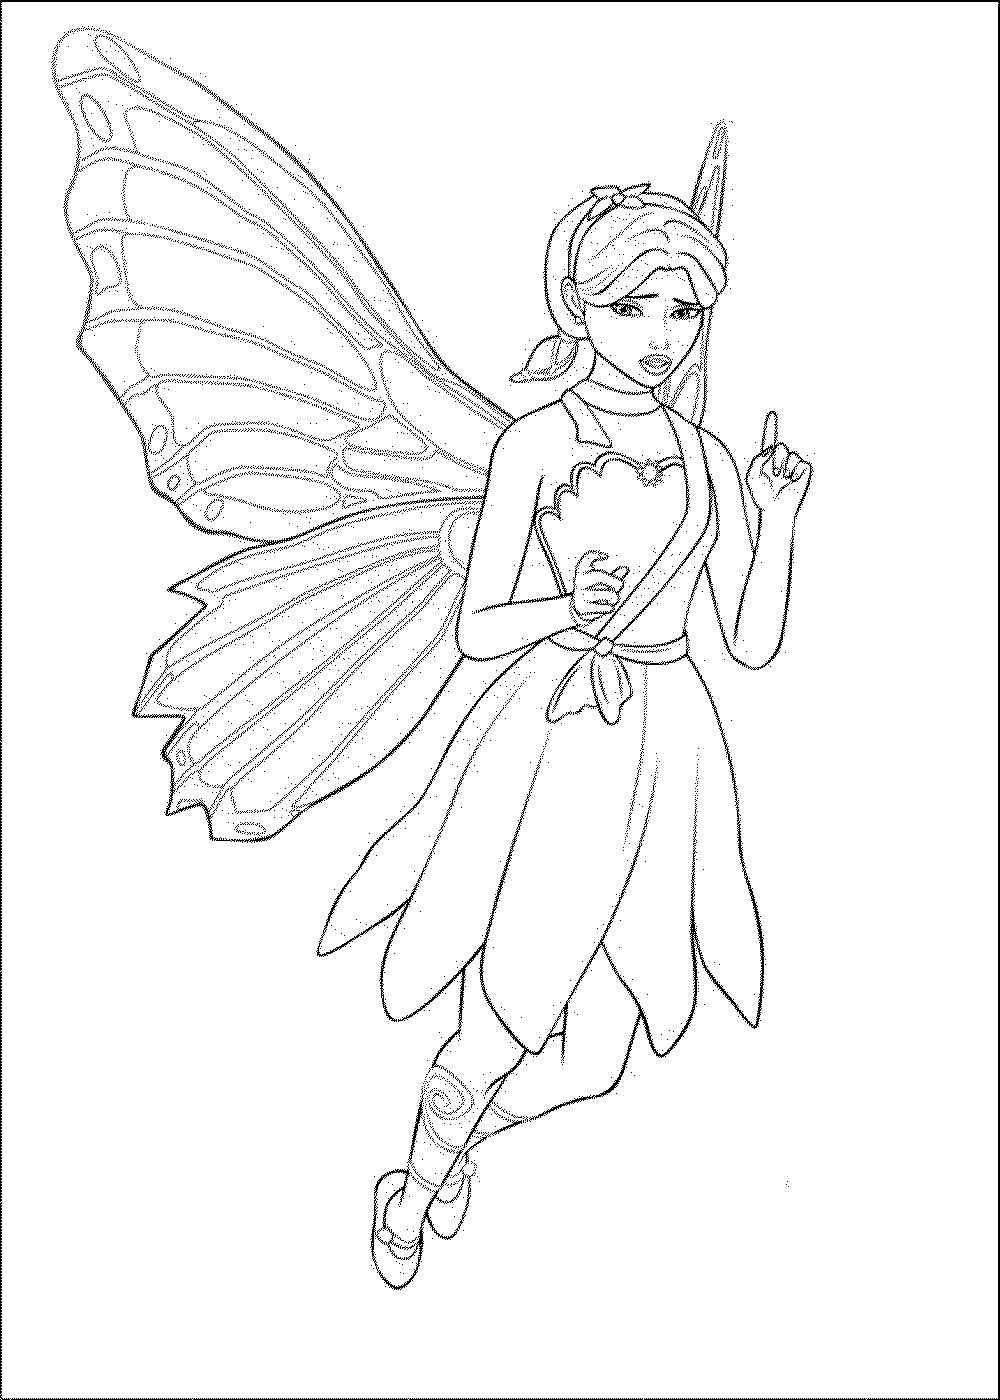 barbie-doll-coloring-pages | | BestAppsForKids.com